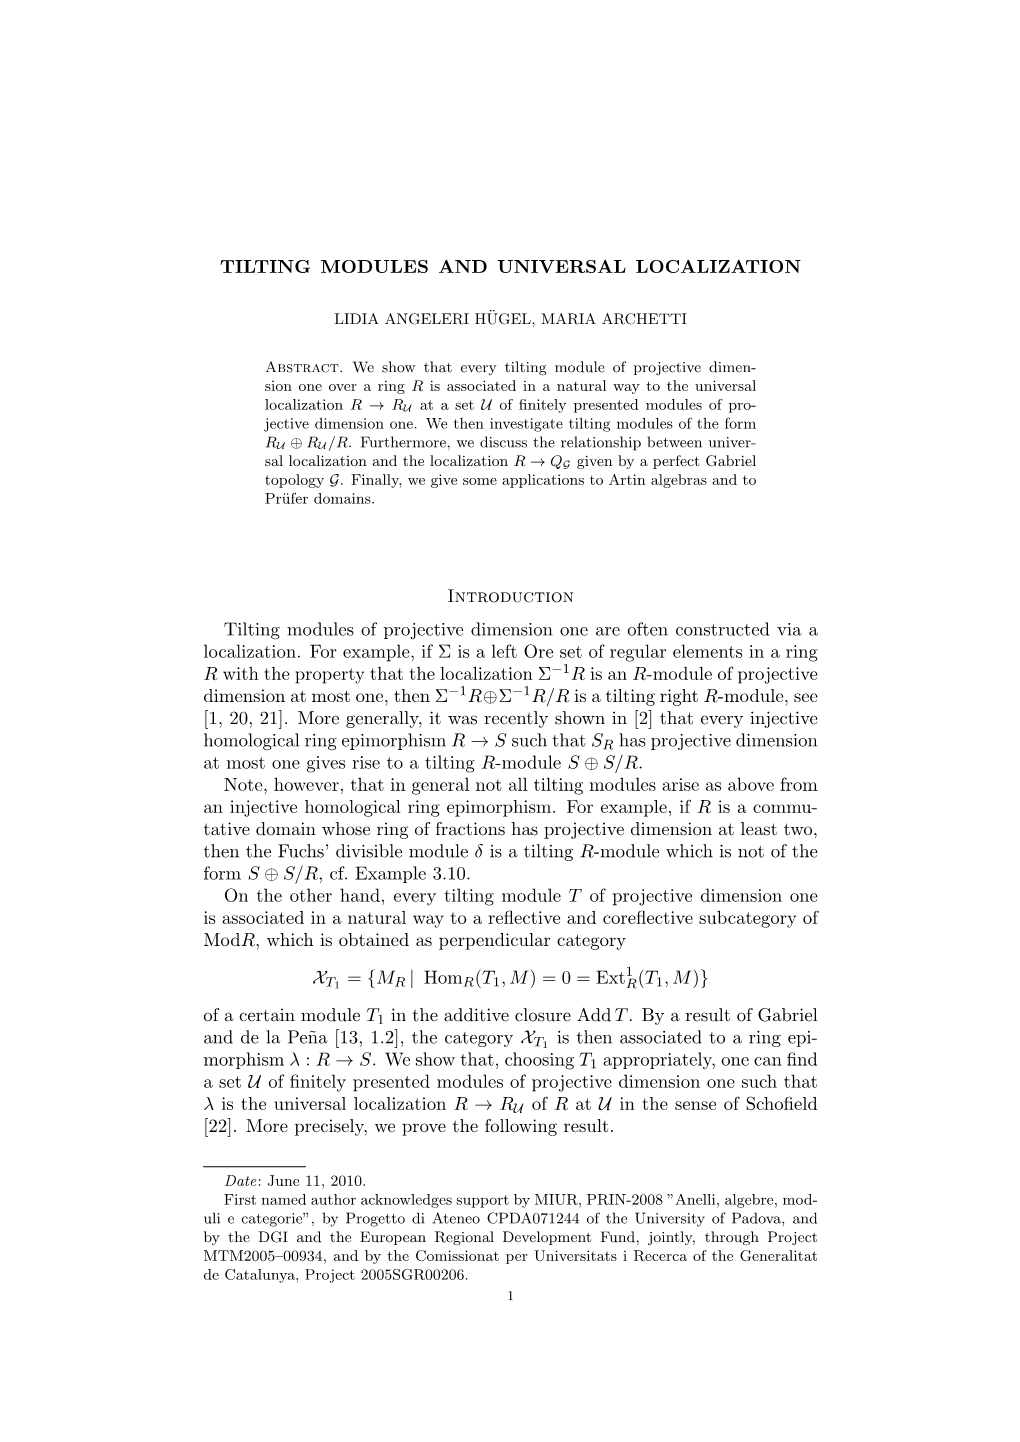 TILTING MODULES and UNIVERSAL LOCALIZATION Introduction Tilting Modules of Projective Dimension One Are Often Constructed Via A